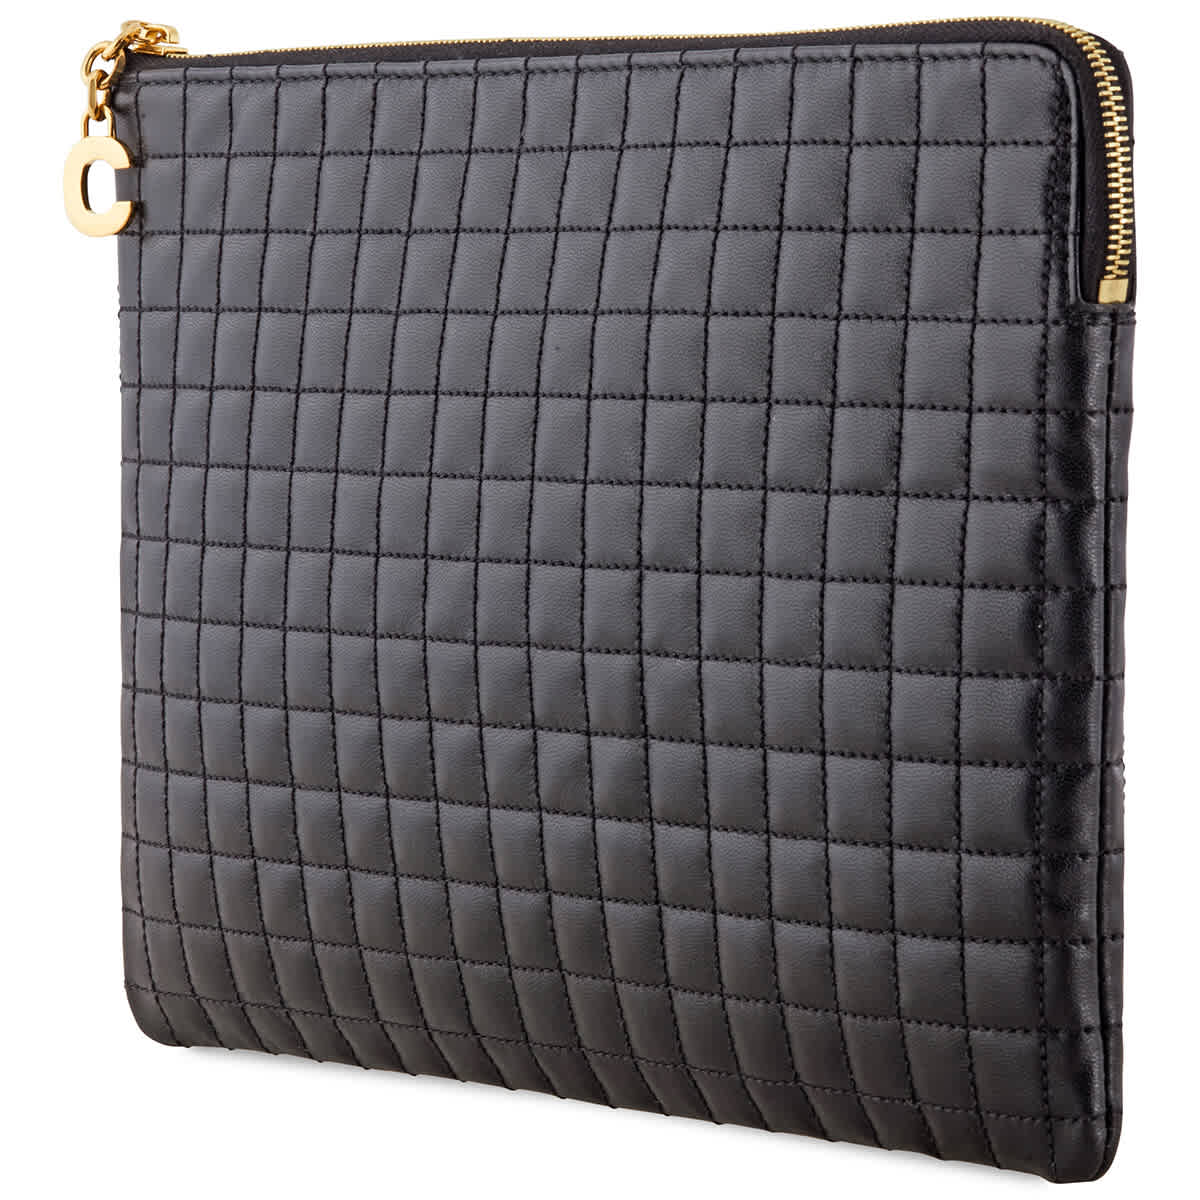 Celine Black Charm Quilted Pouch